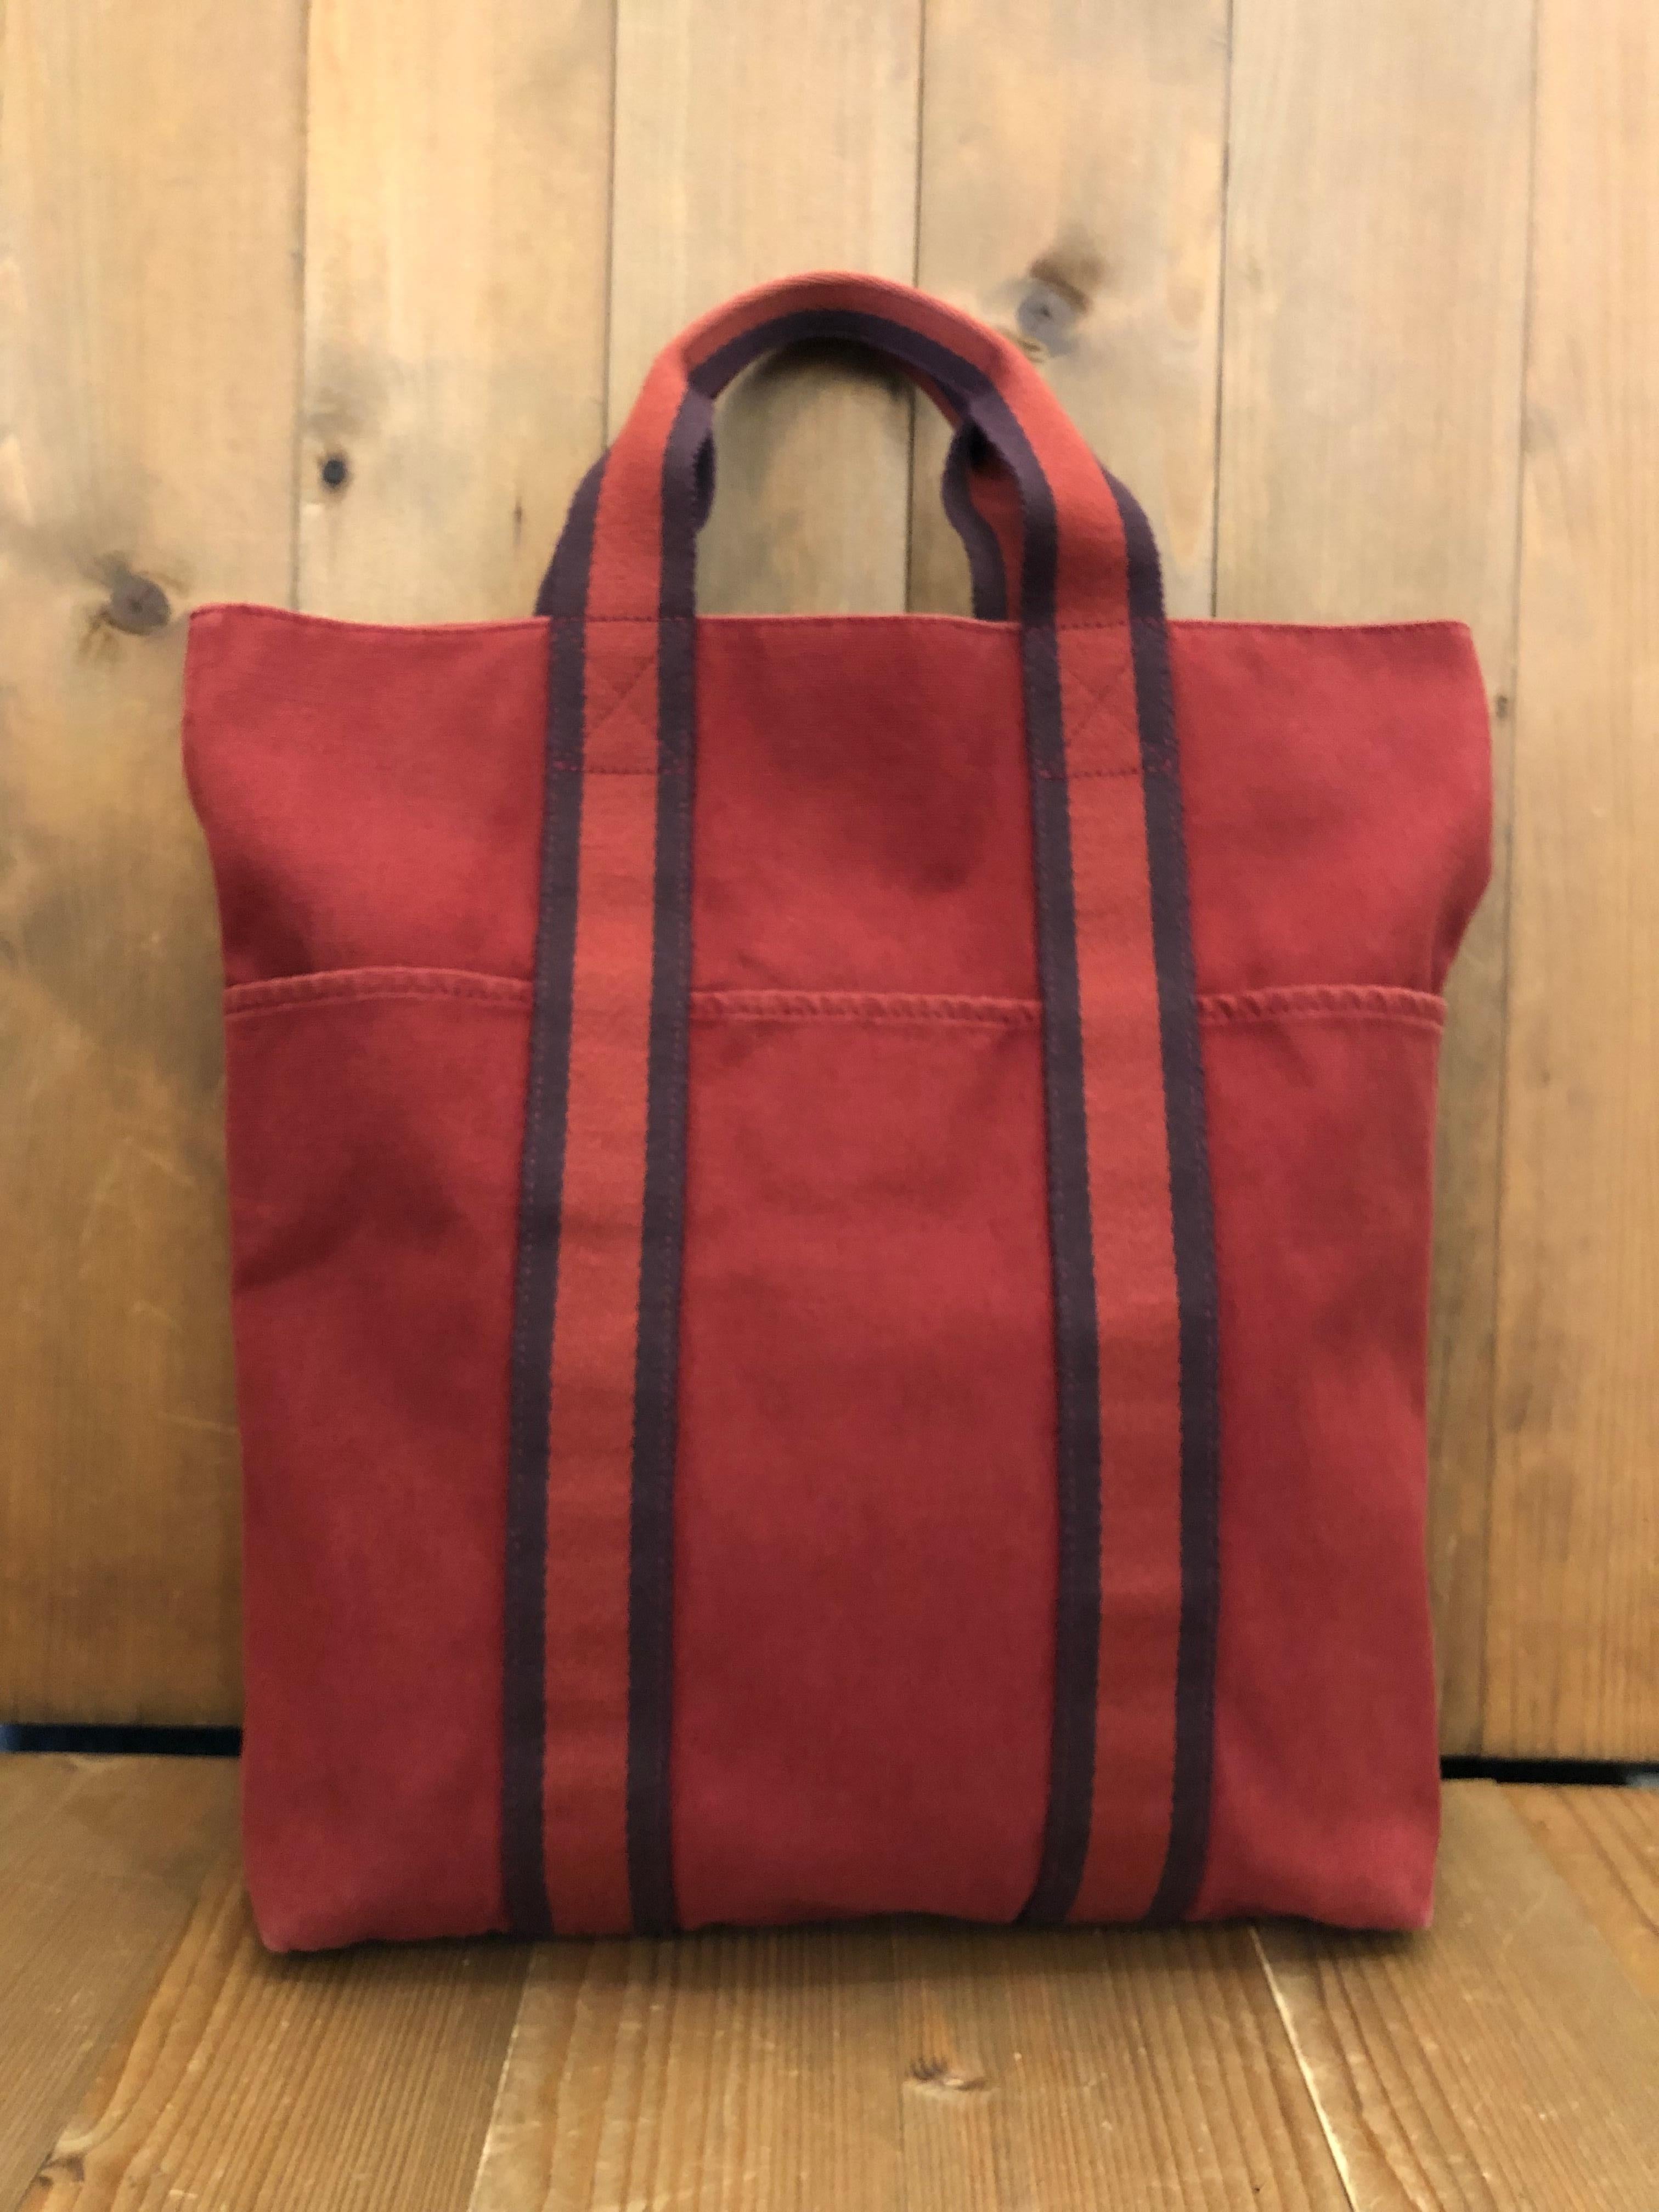 Vintage HERMES Fourre Tout in orange colored cotton featuring three exterior open pockets and one interior open pocket. Measures approximately  14 (top) 12 (bottom) x 15 x 2.5 inches Drop 4 inches. 

Condition - Some signs of wear consistent with